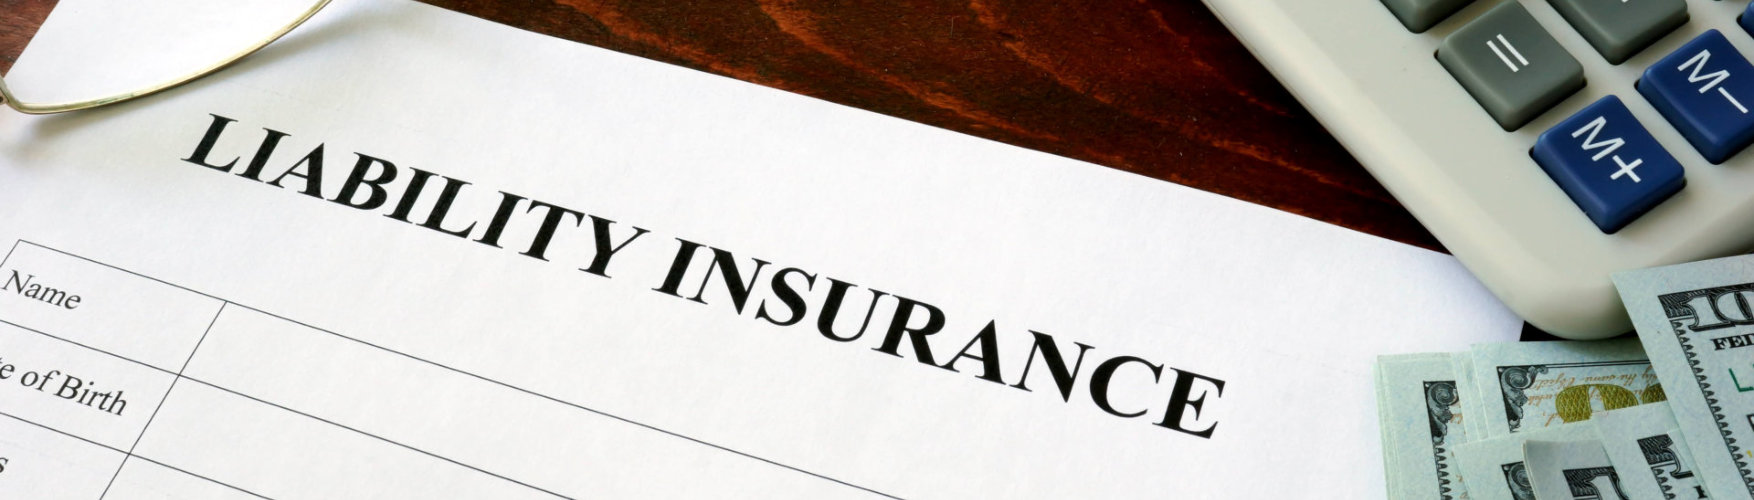 liability insurance form and dollars on the table